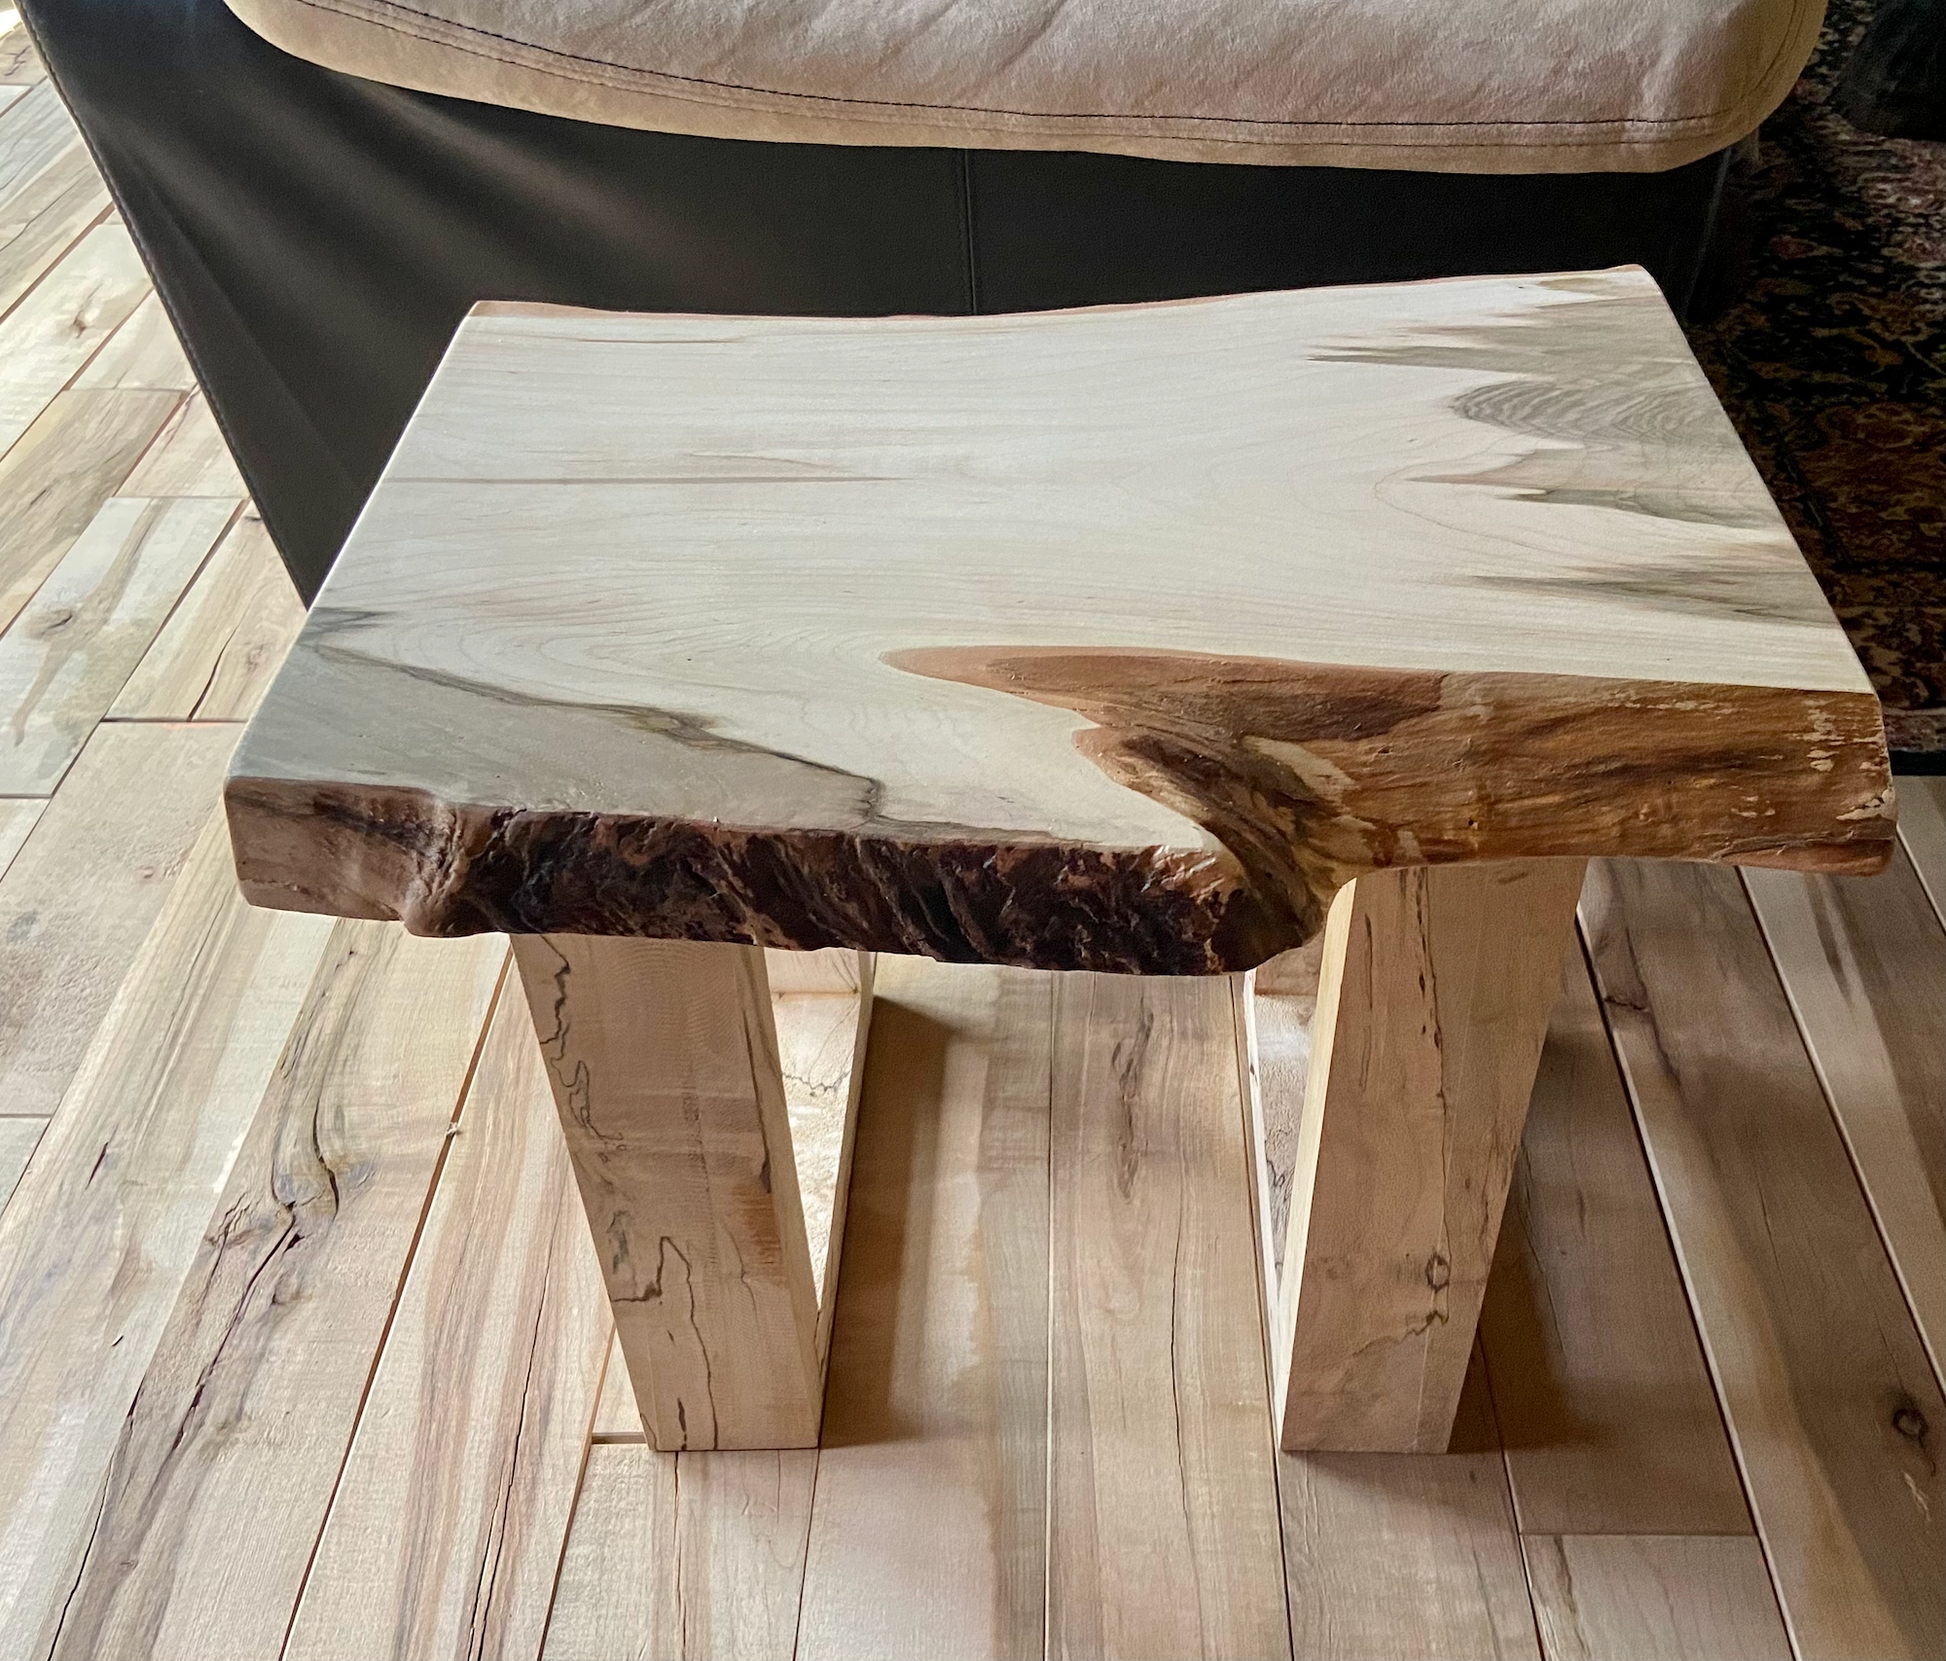 Small Live Edge Ambrosia Maple End Table (20"L x 16"W)|Modern Coffee Table|Sleek Live Edge Side Table|Maple Wood Accent Table|Bedside Table